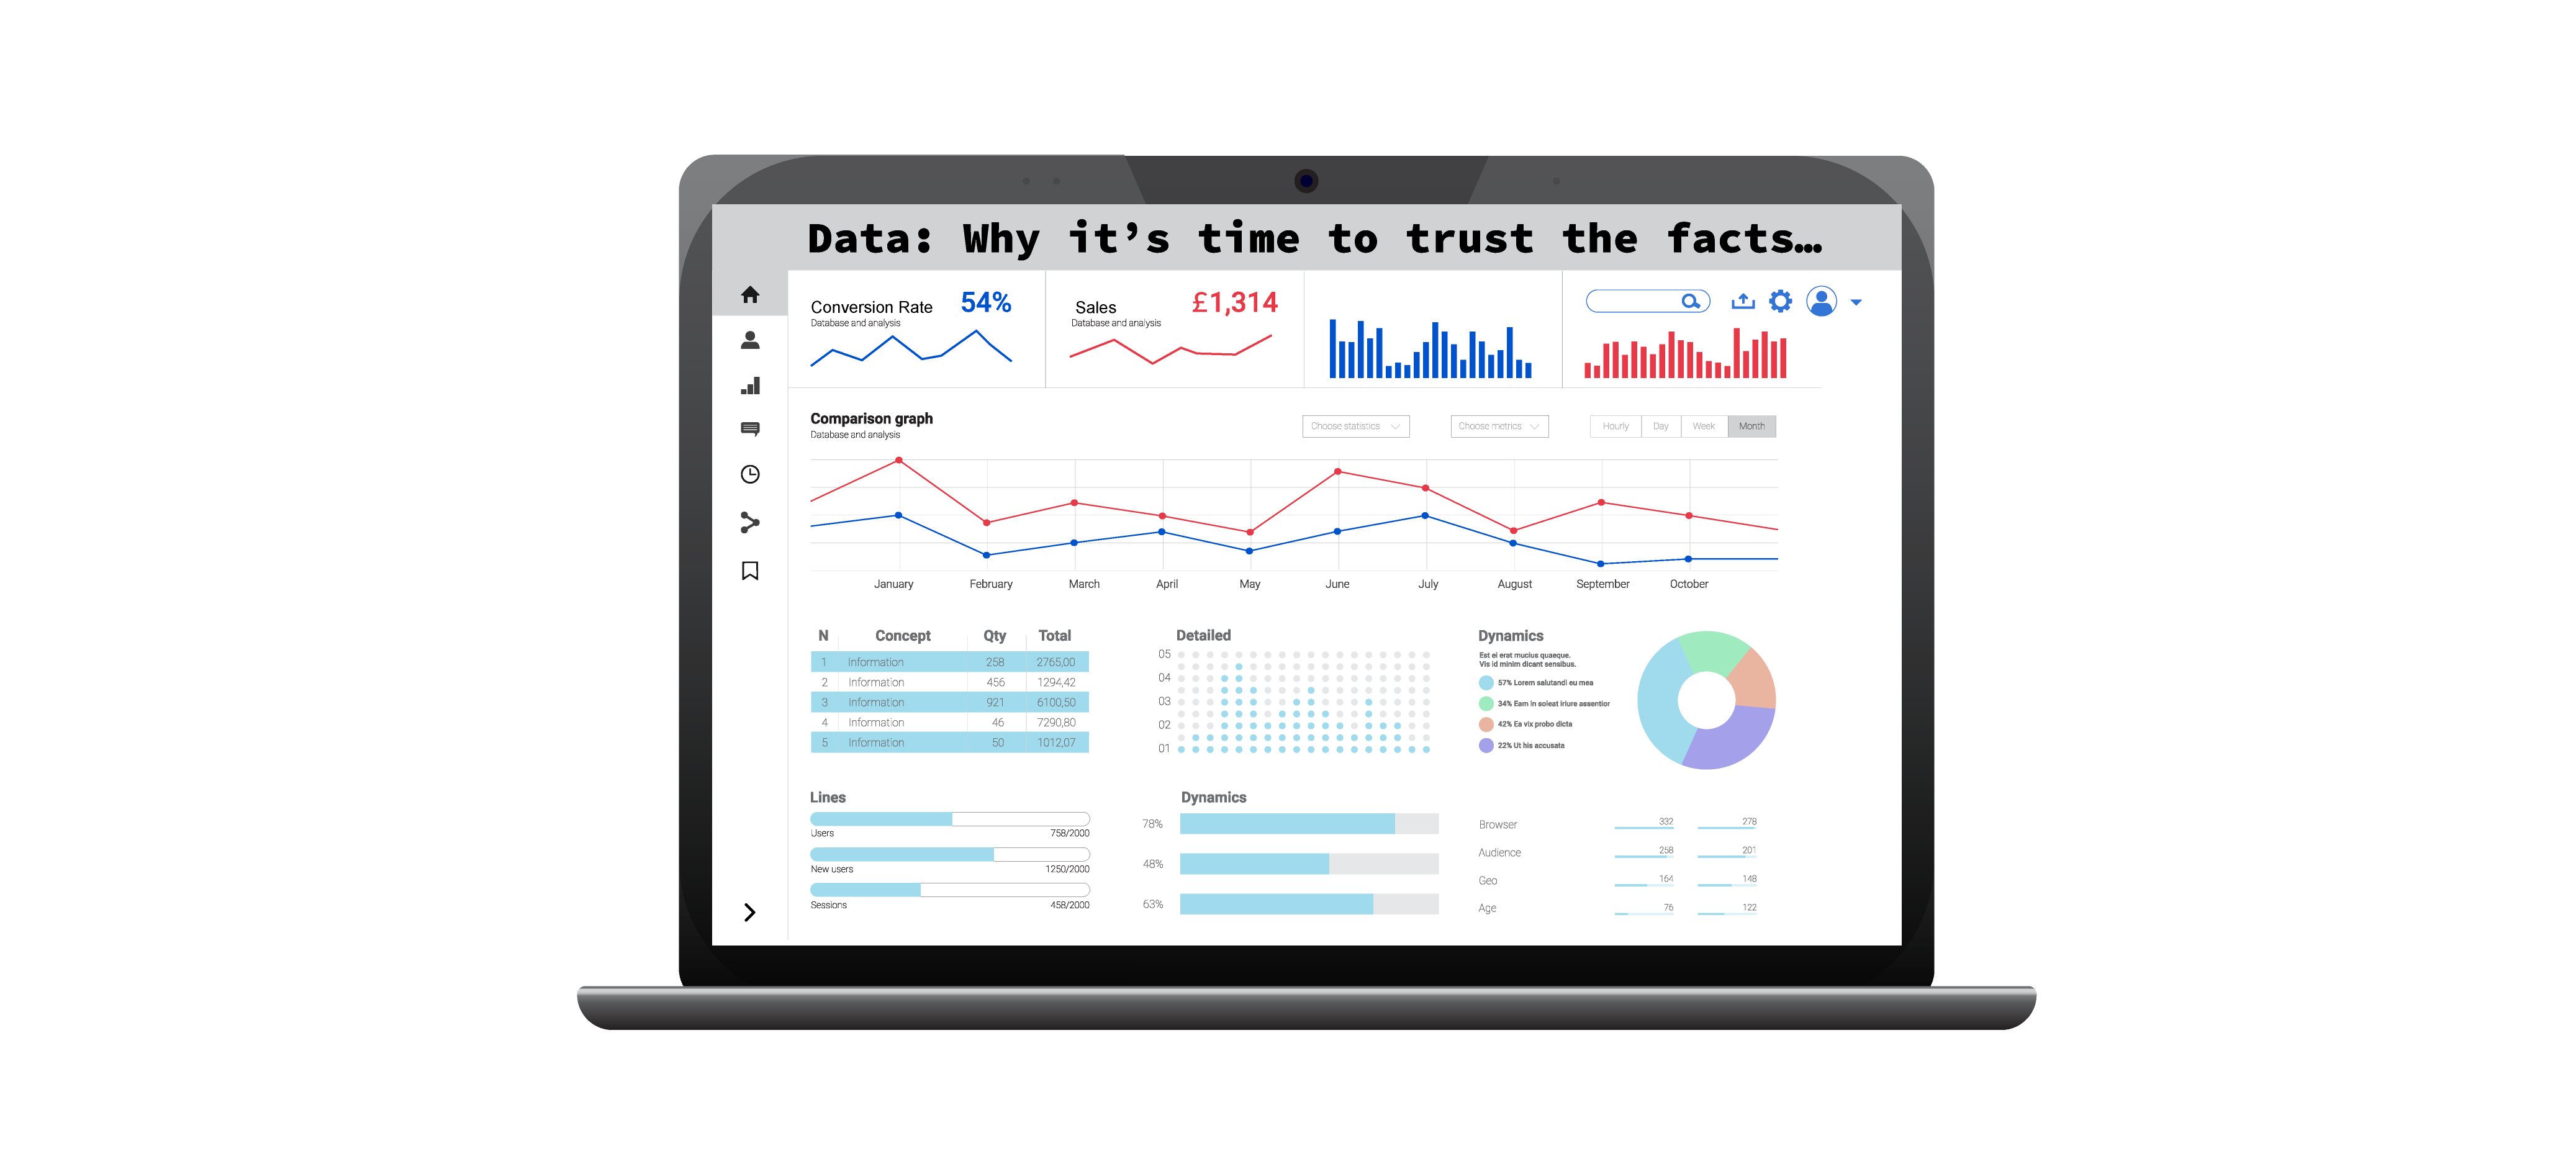 Data: Why it’s time to trust the facts